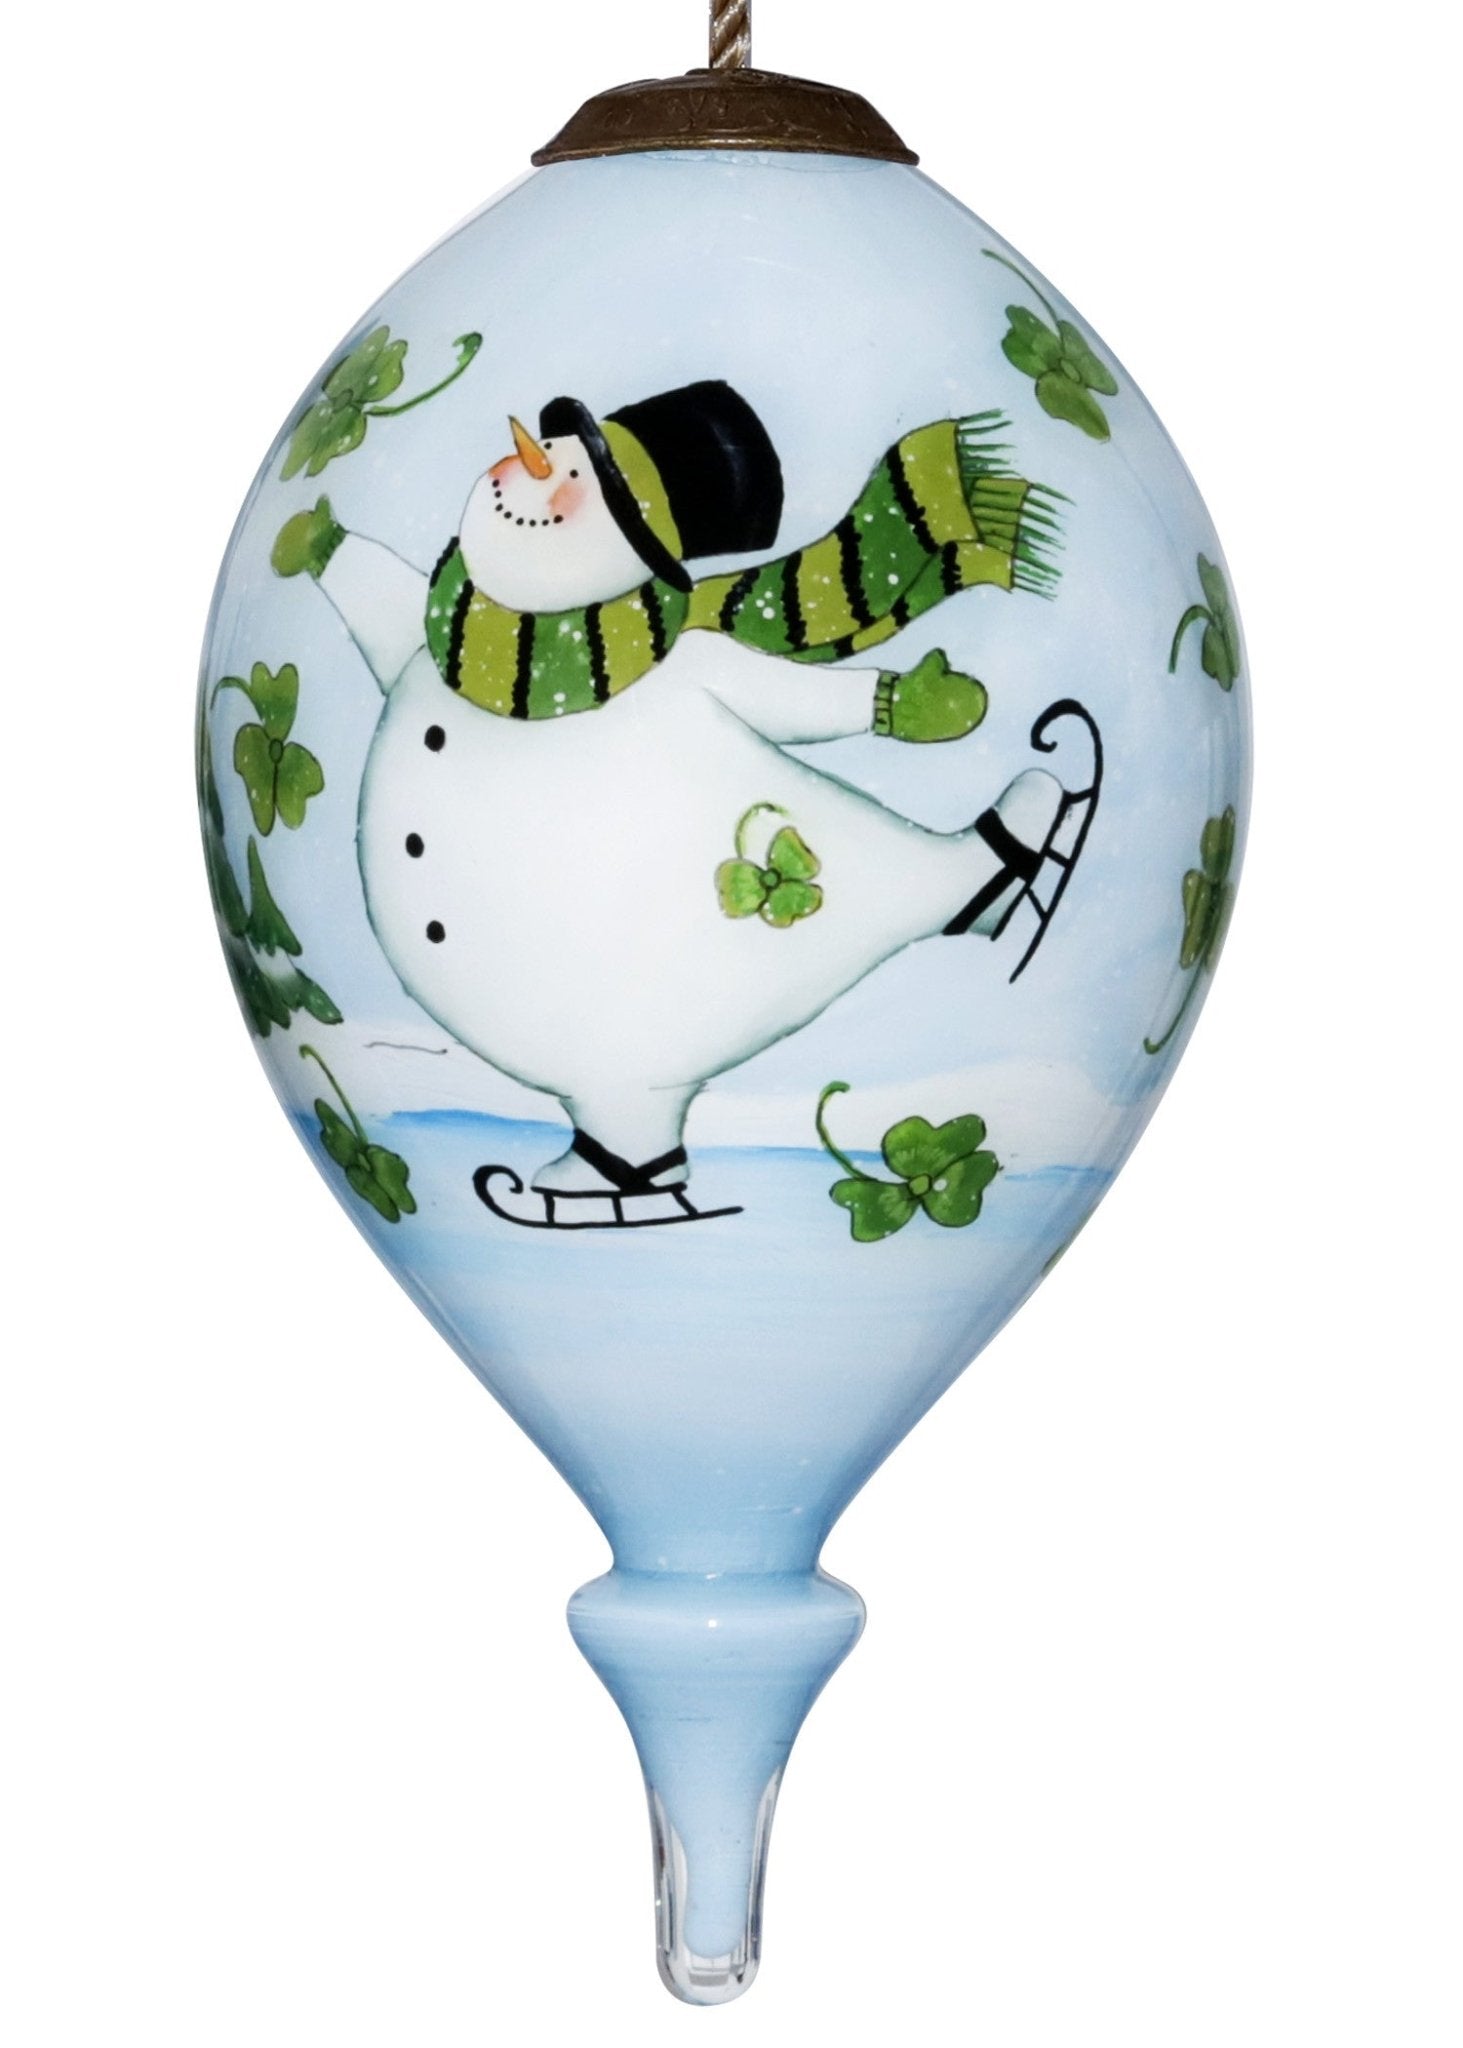 Ice Skating Shamrock Snowman Hand Painted Mouth Blown Glass Ornament - Tuesday Morning-Christmas Ornaments